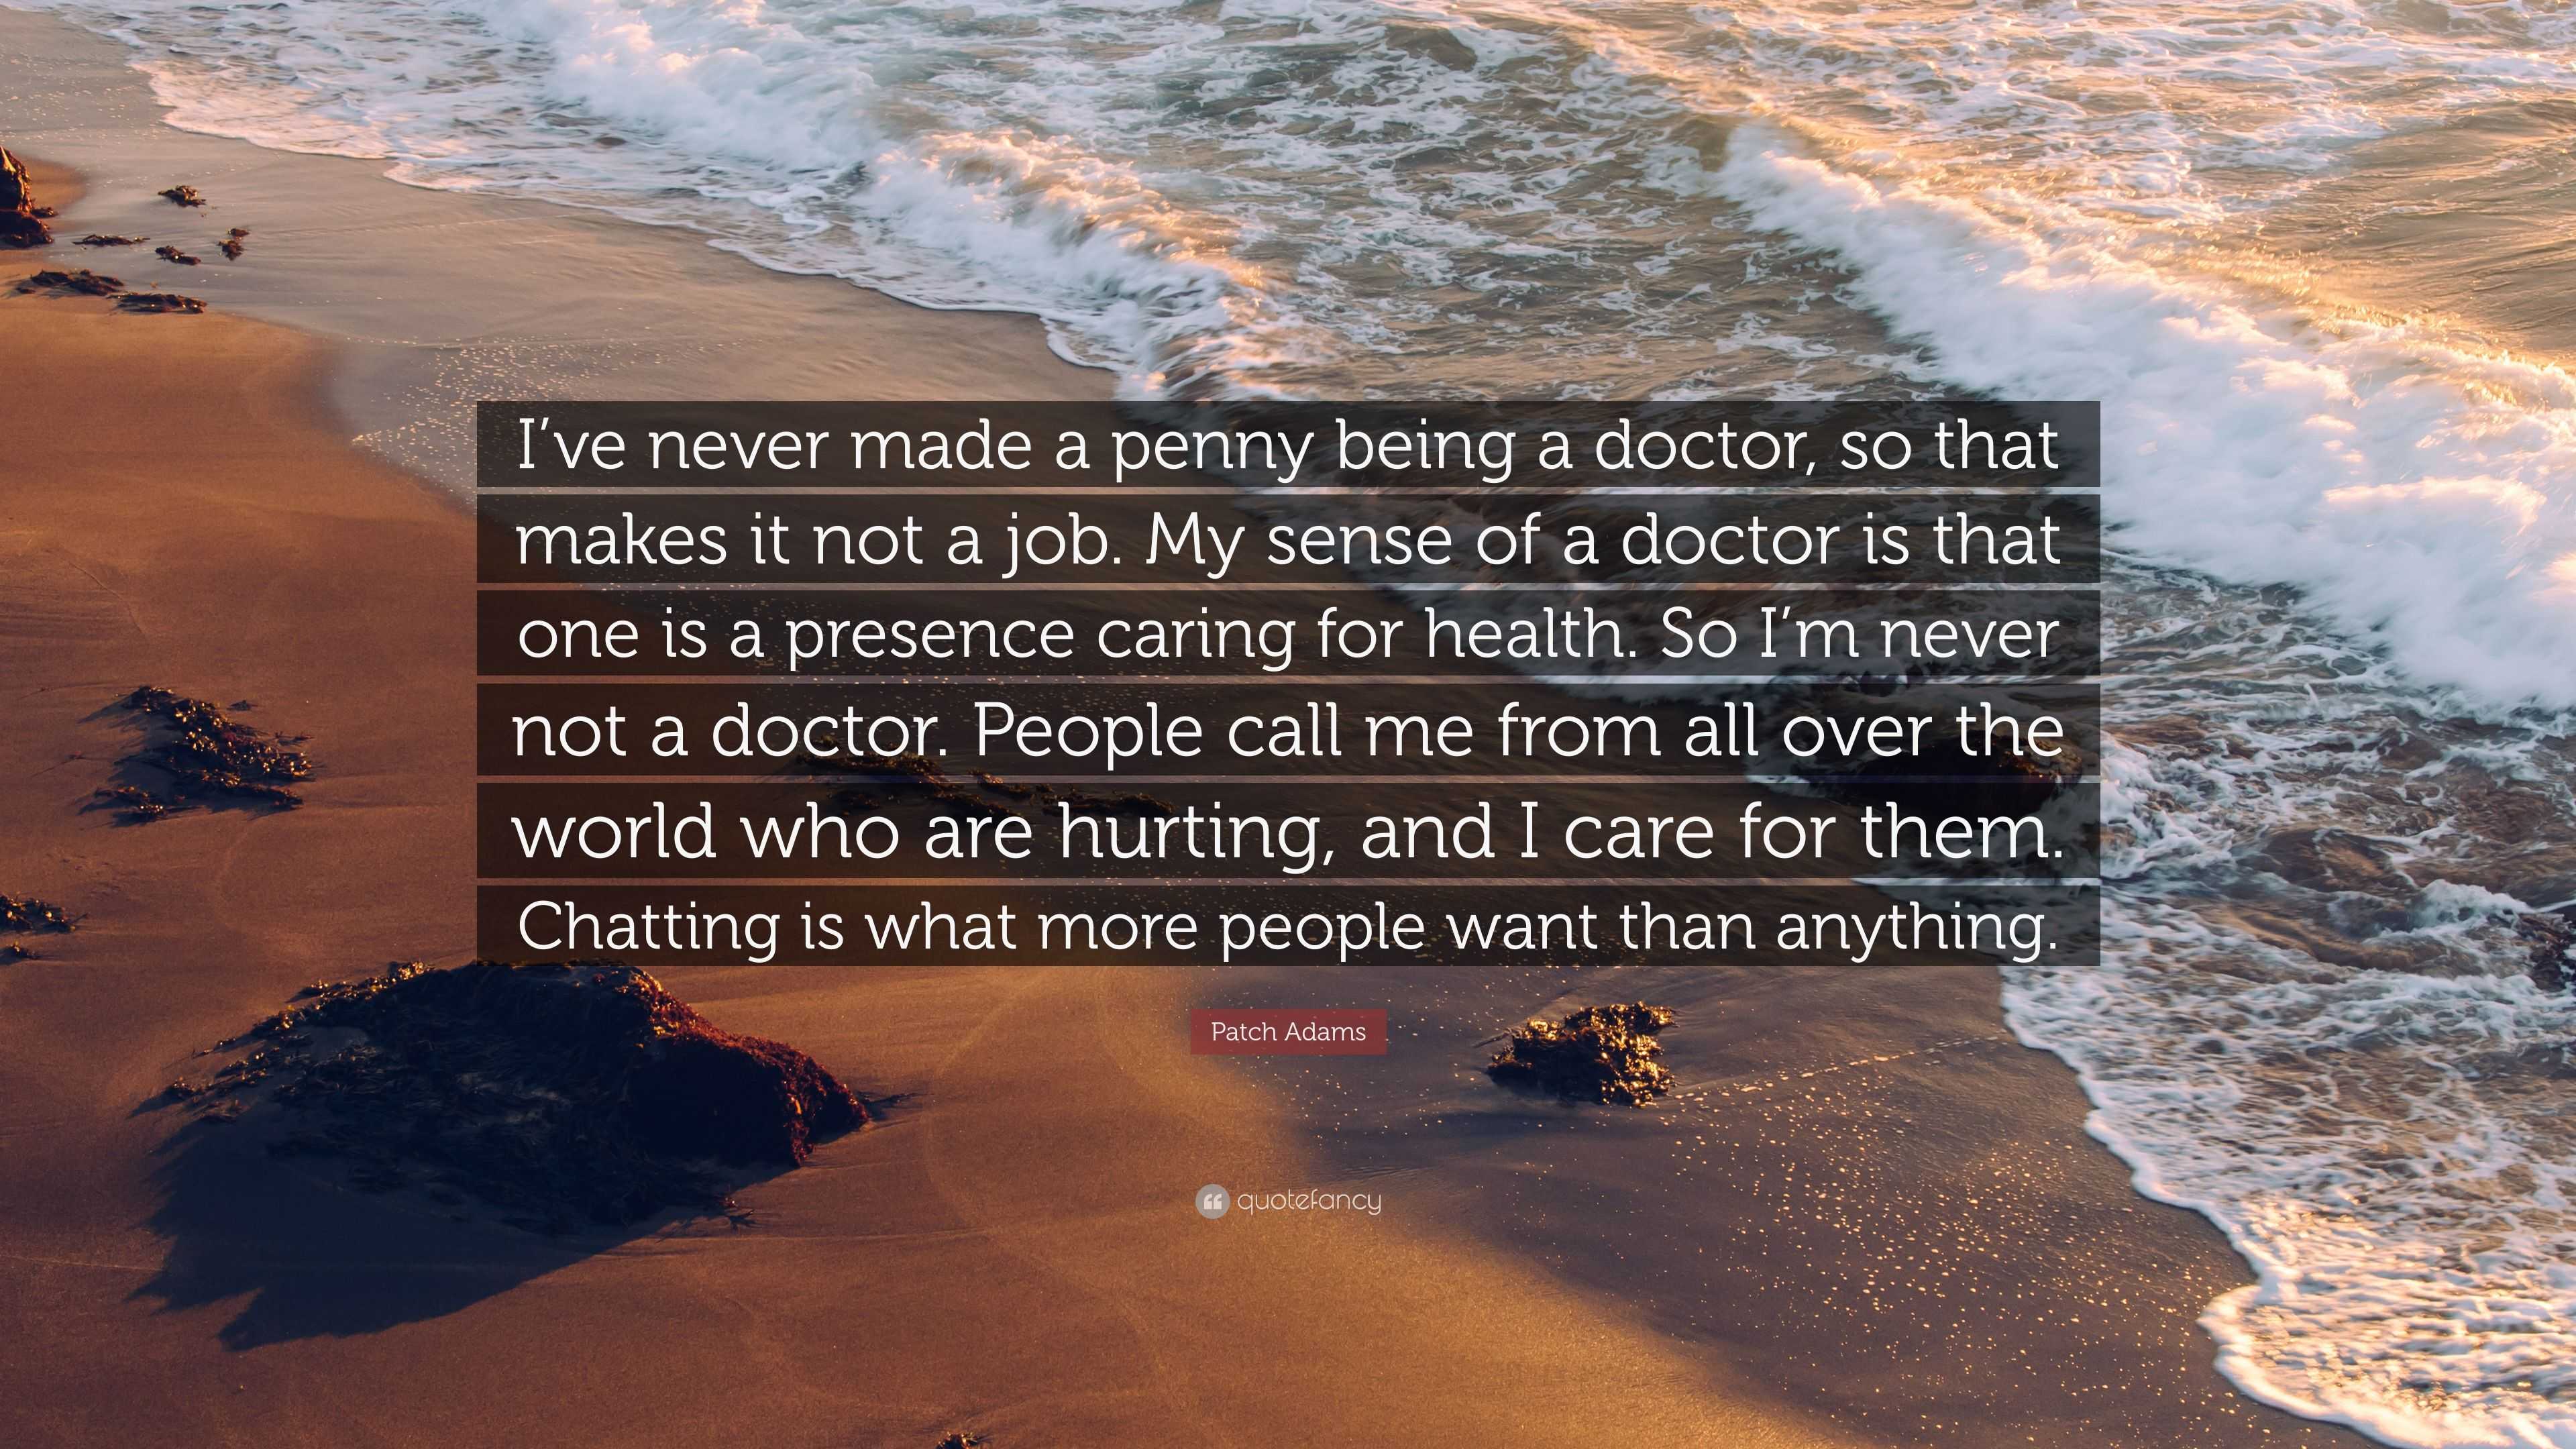 Patch Adams Quote: “I’ve never made a penny being a doctor, so that